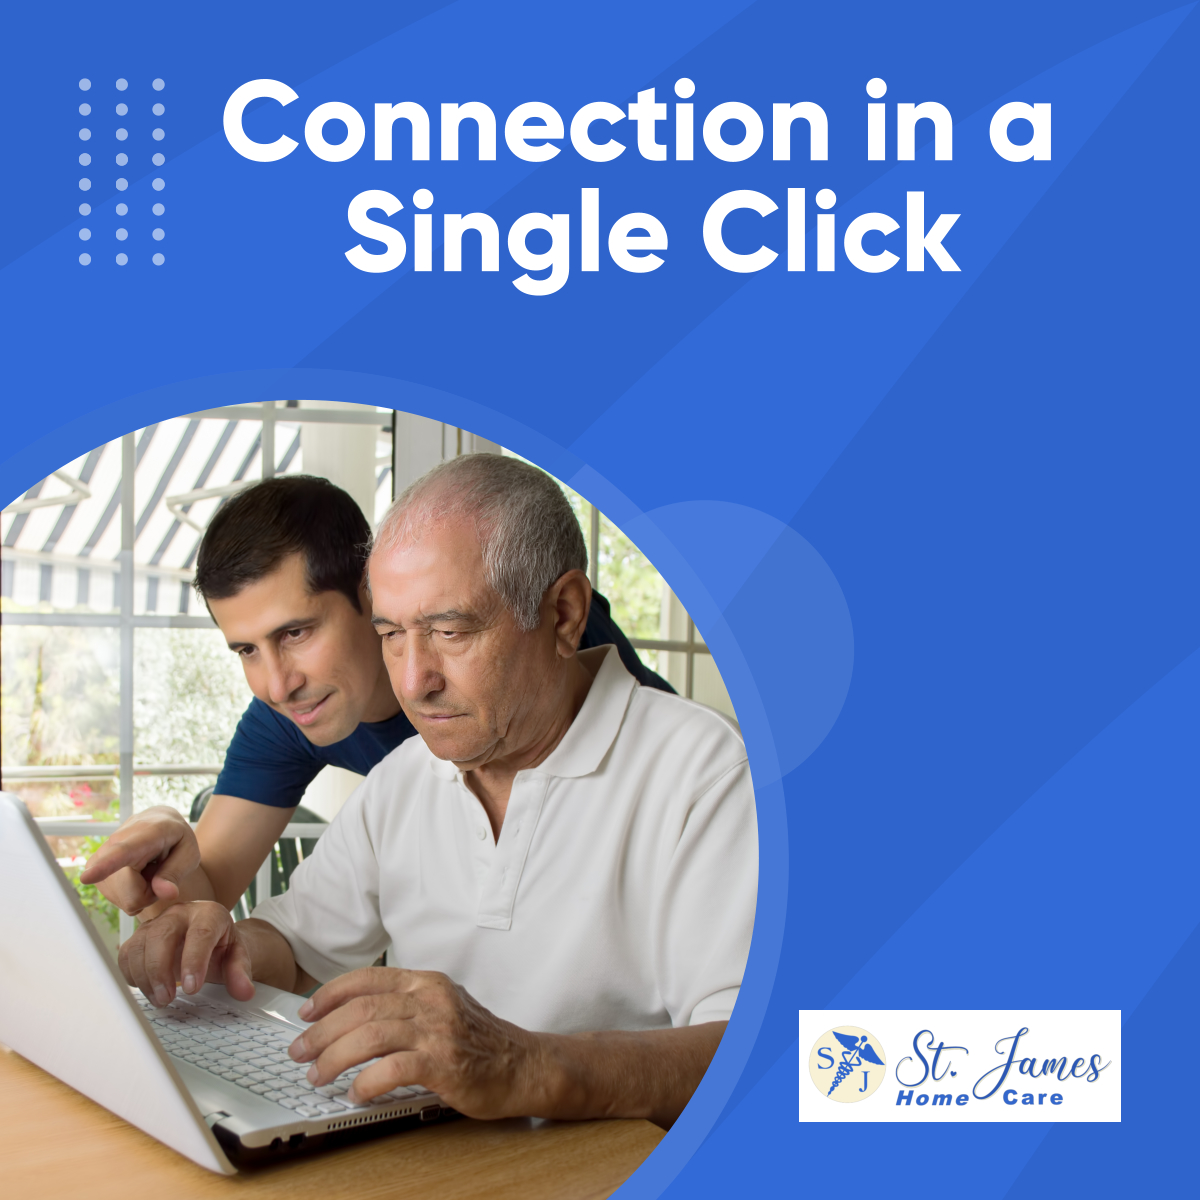 The use of modern technology is beneficial to everyone, especially seniors. Our staff can assist and teach them how to use the latest gadgets and apps to connect with you.

#ModernTechnology #AssistanceServices